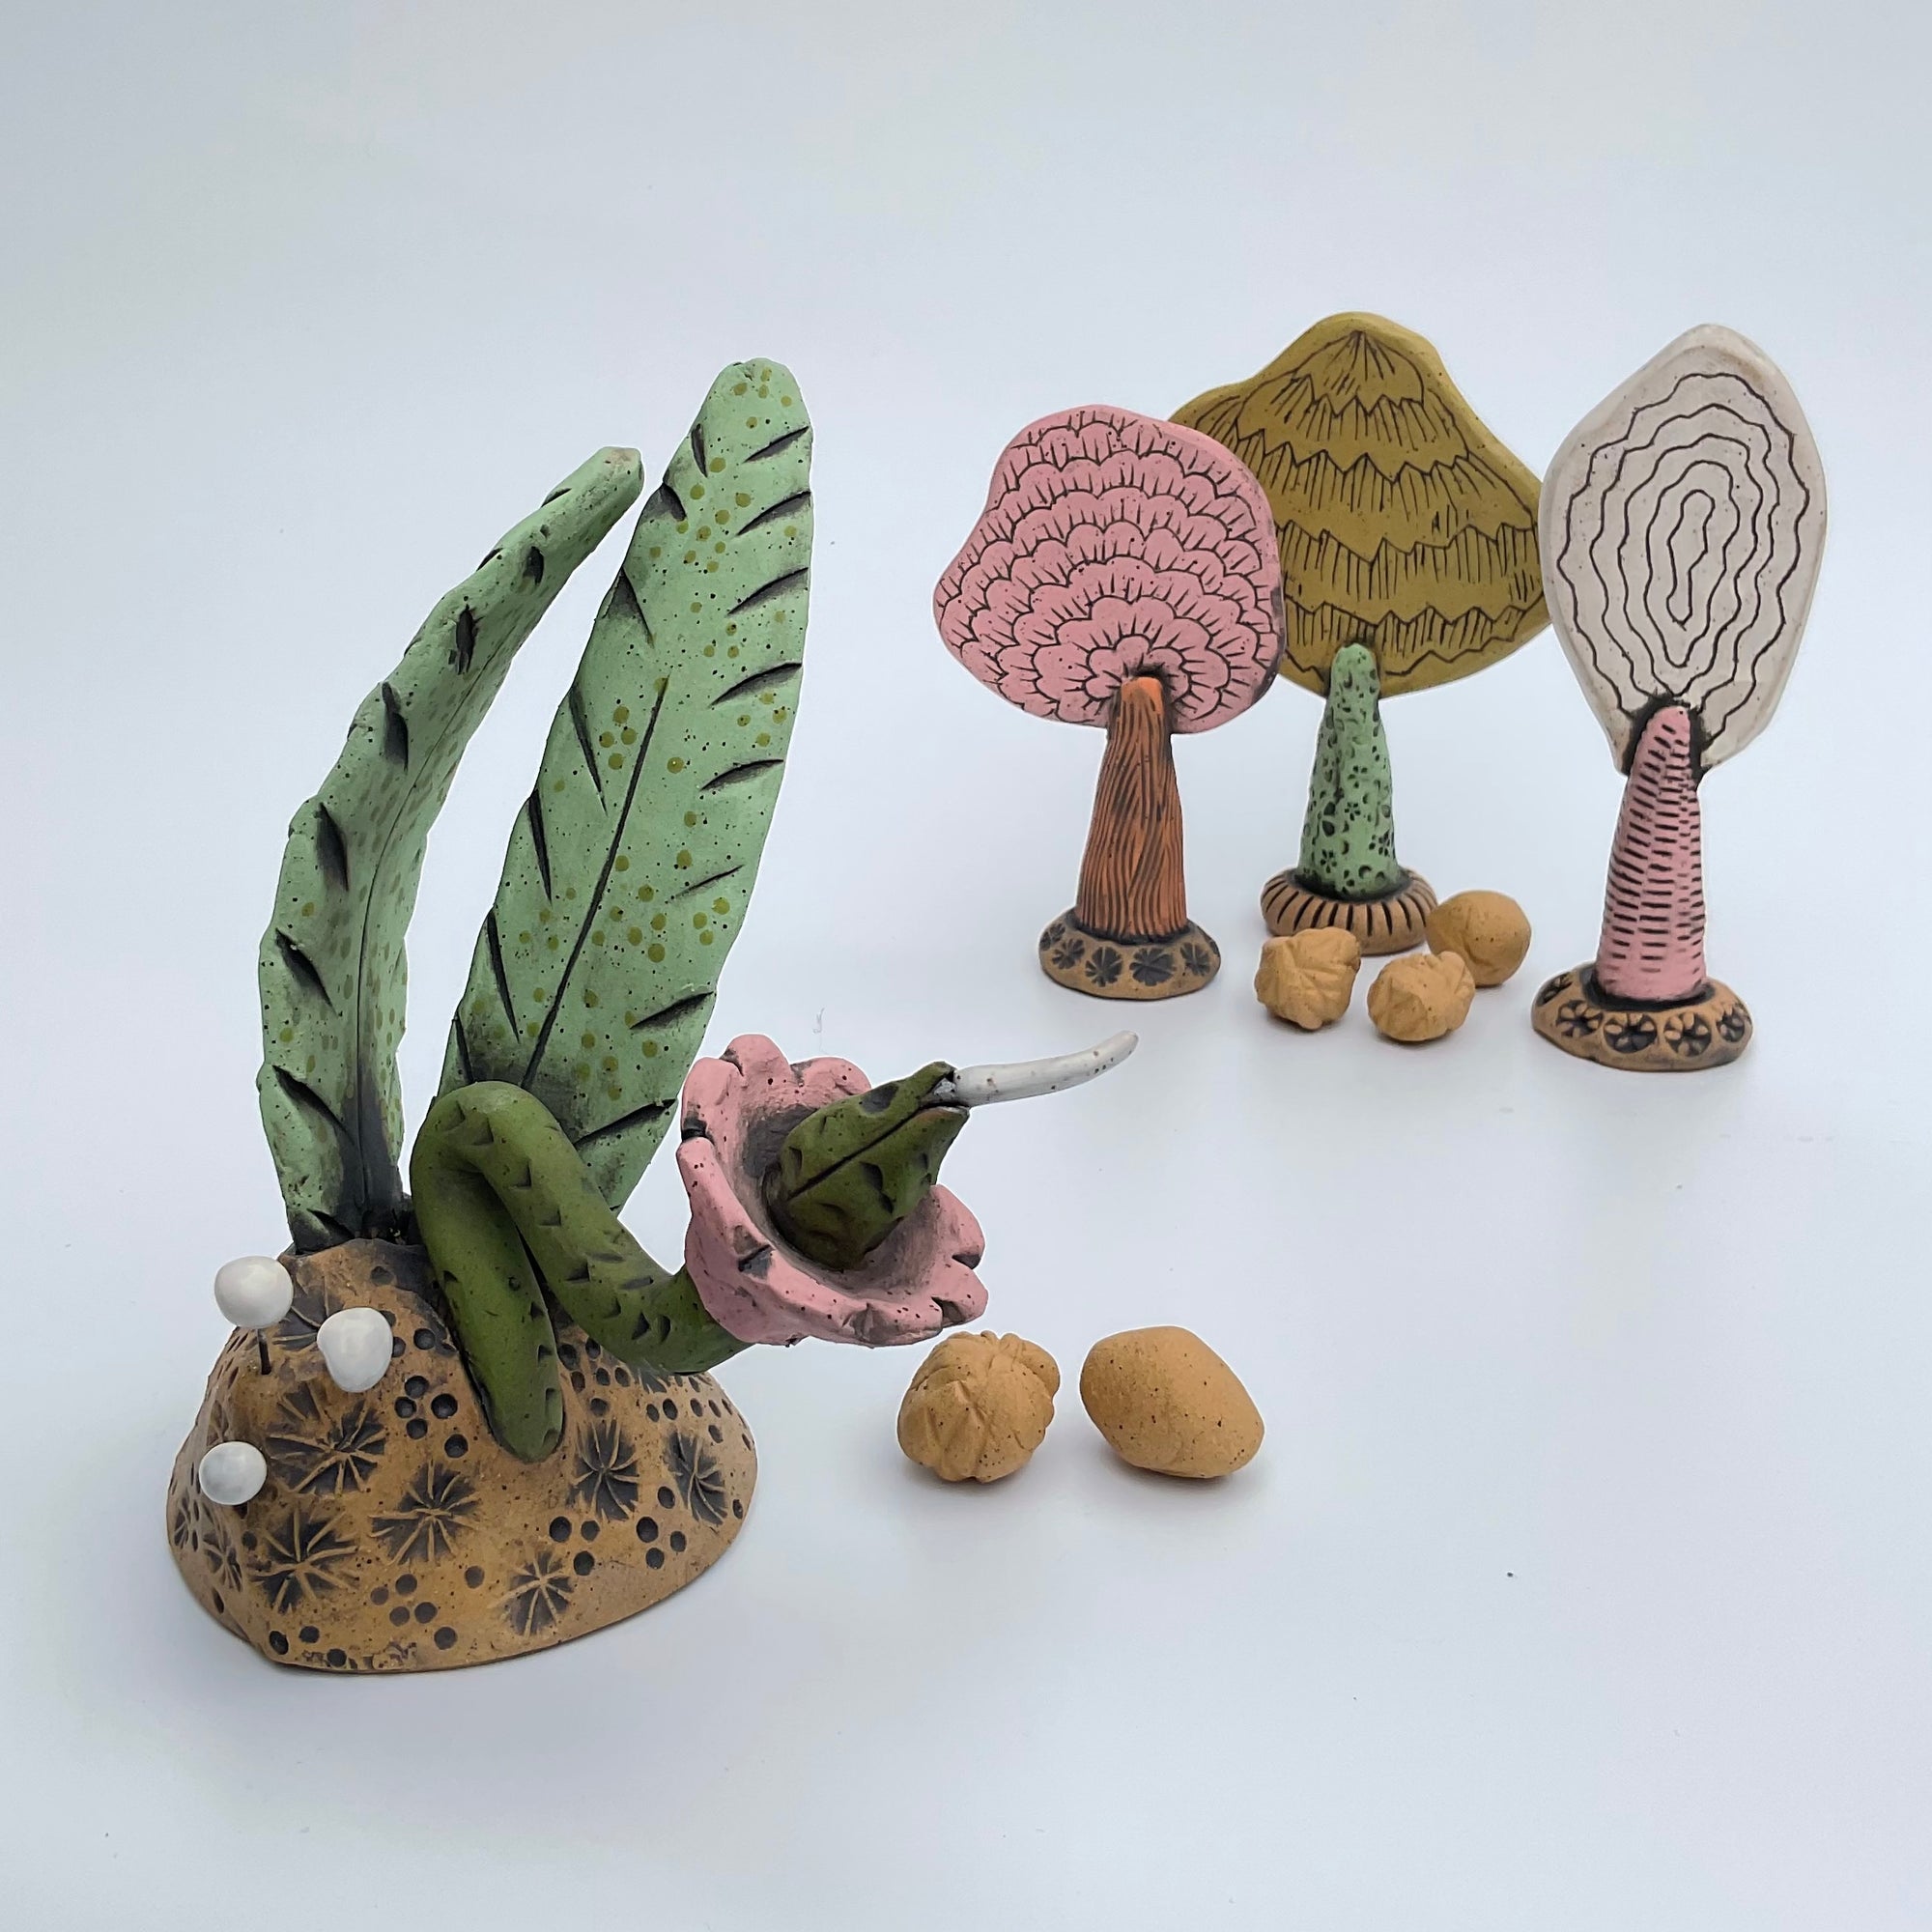 FEATURED ARTIST: Jeanette Zeis - They Went to the Woods & Made Plans